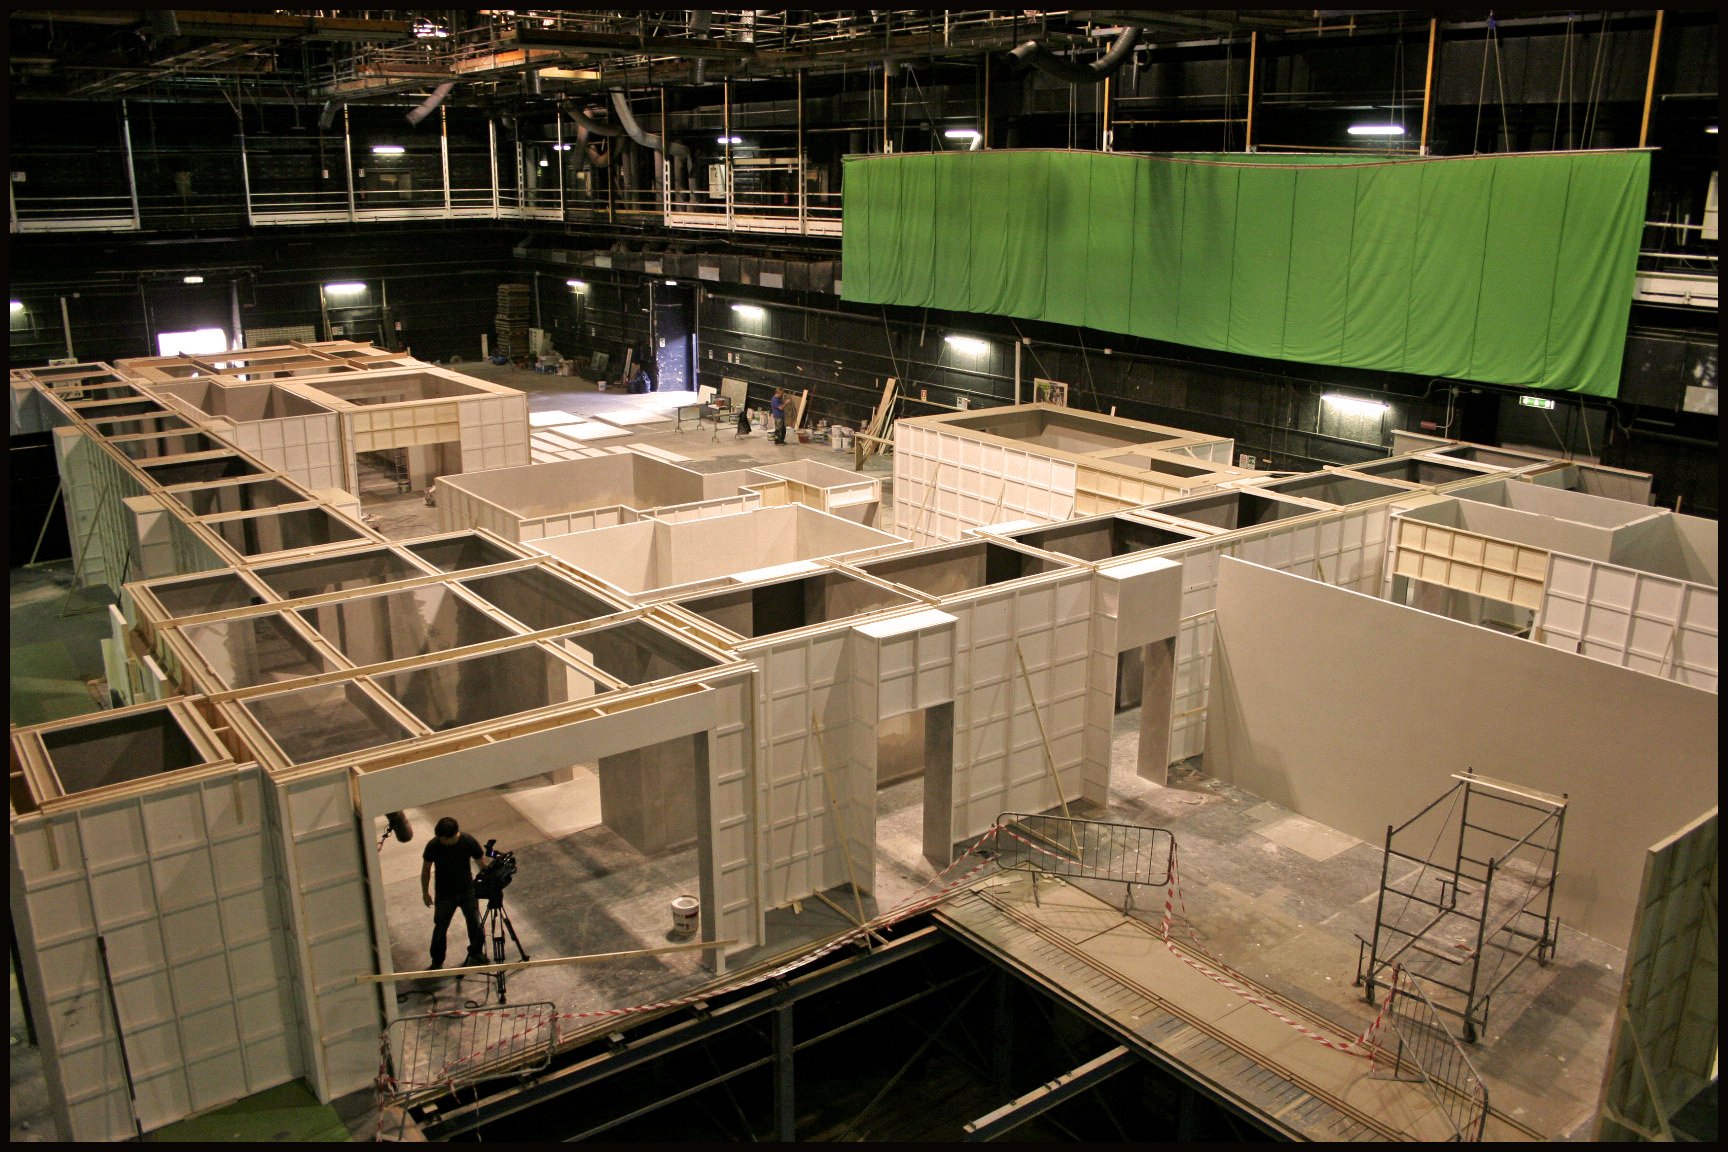 THIRD PERSON - Directed by Paul Haggis - Set Construction - ©2013 – Corsan